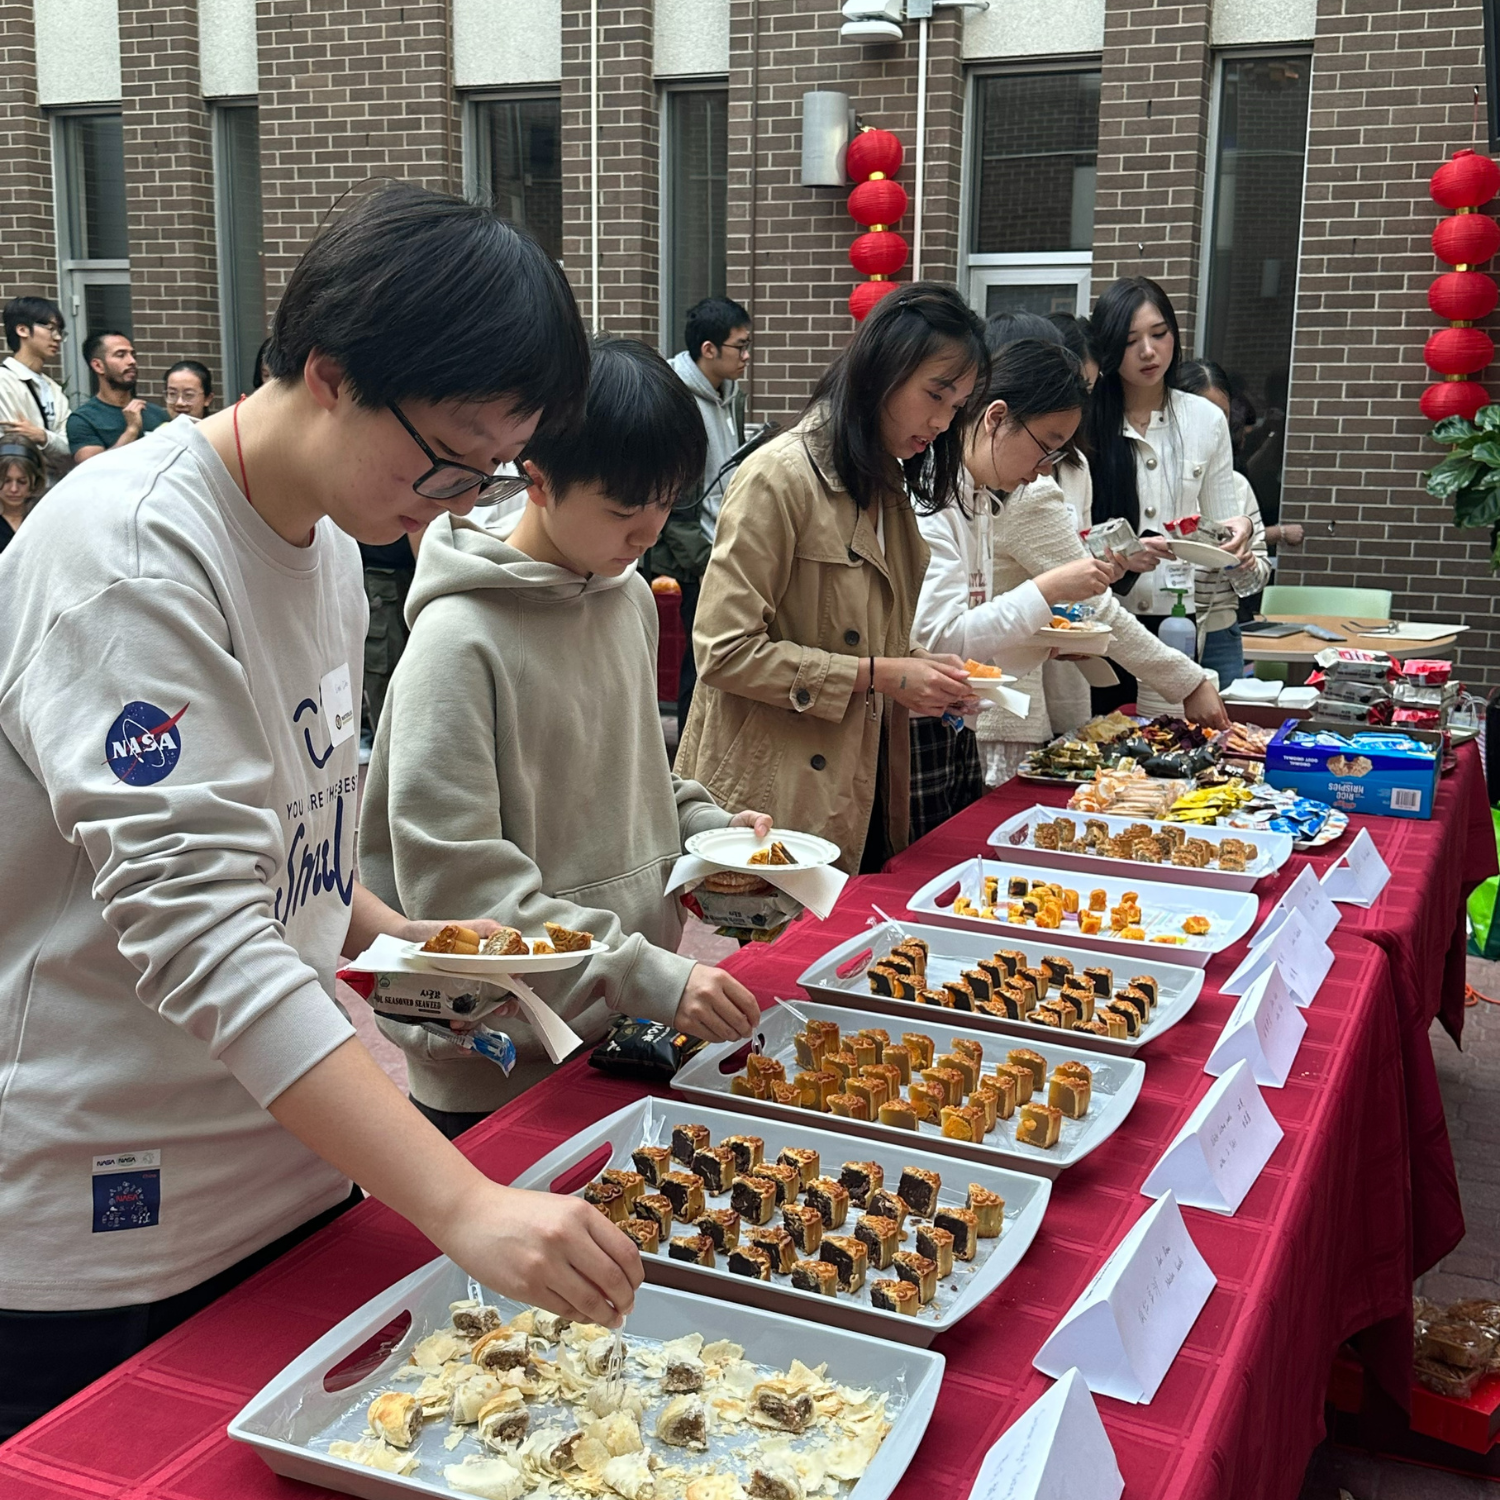 Attendees grabbing moon cakes and other snacks.